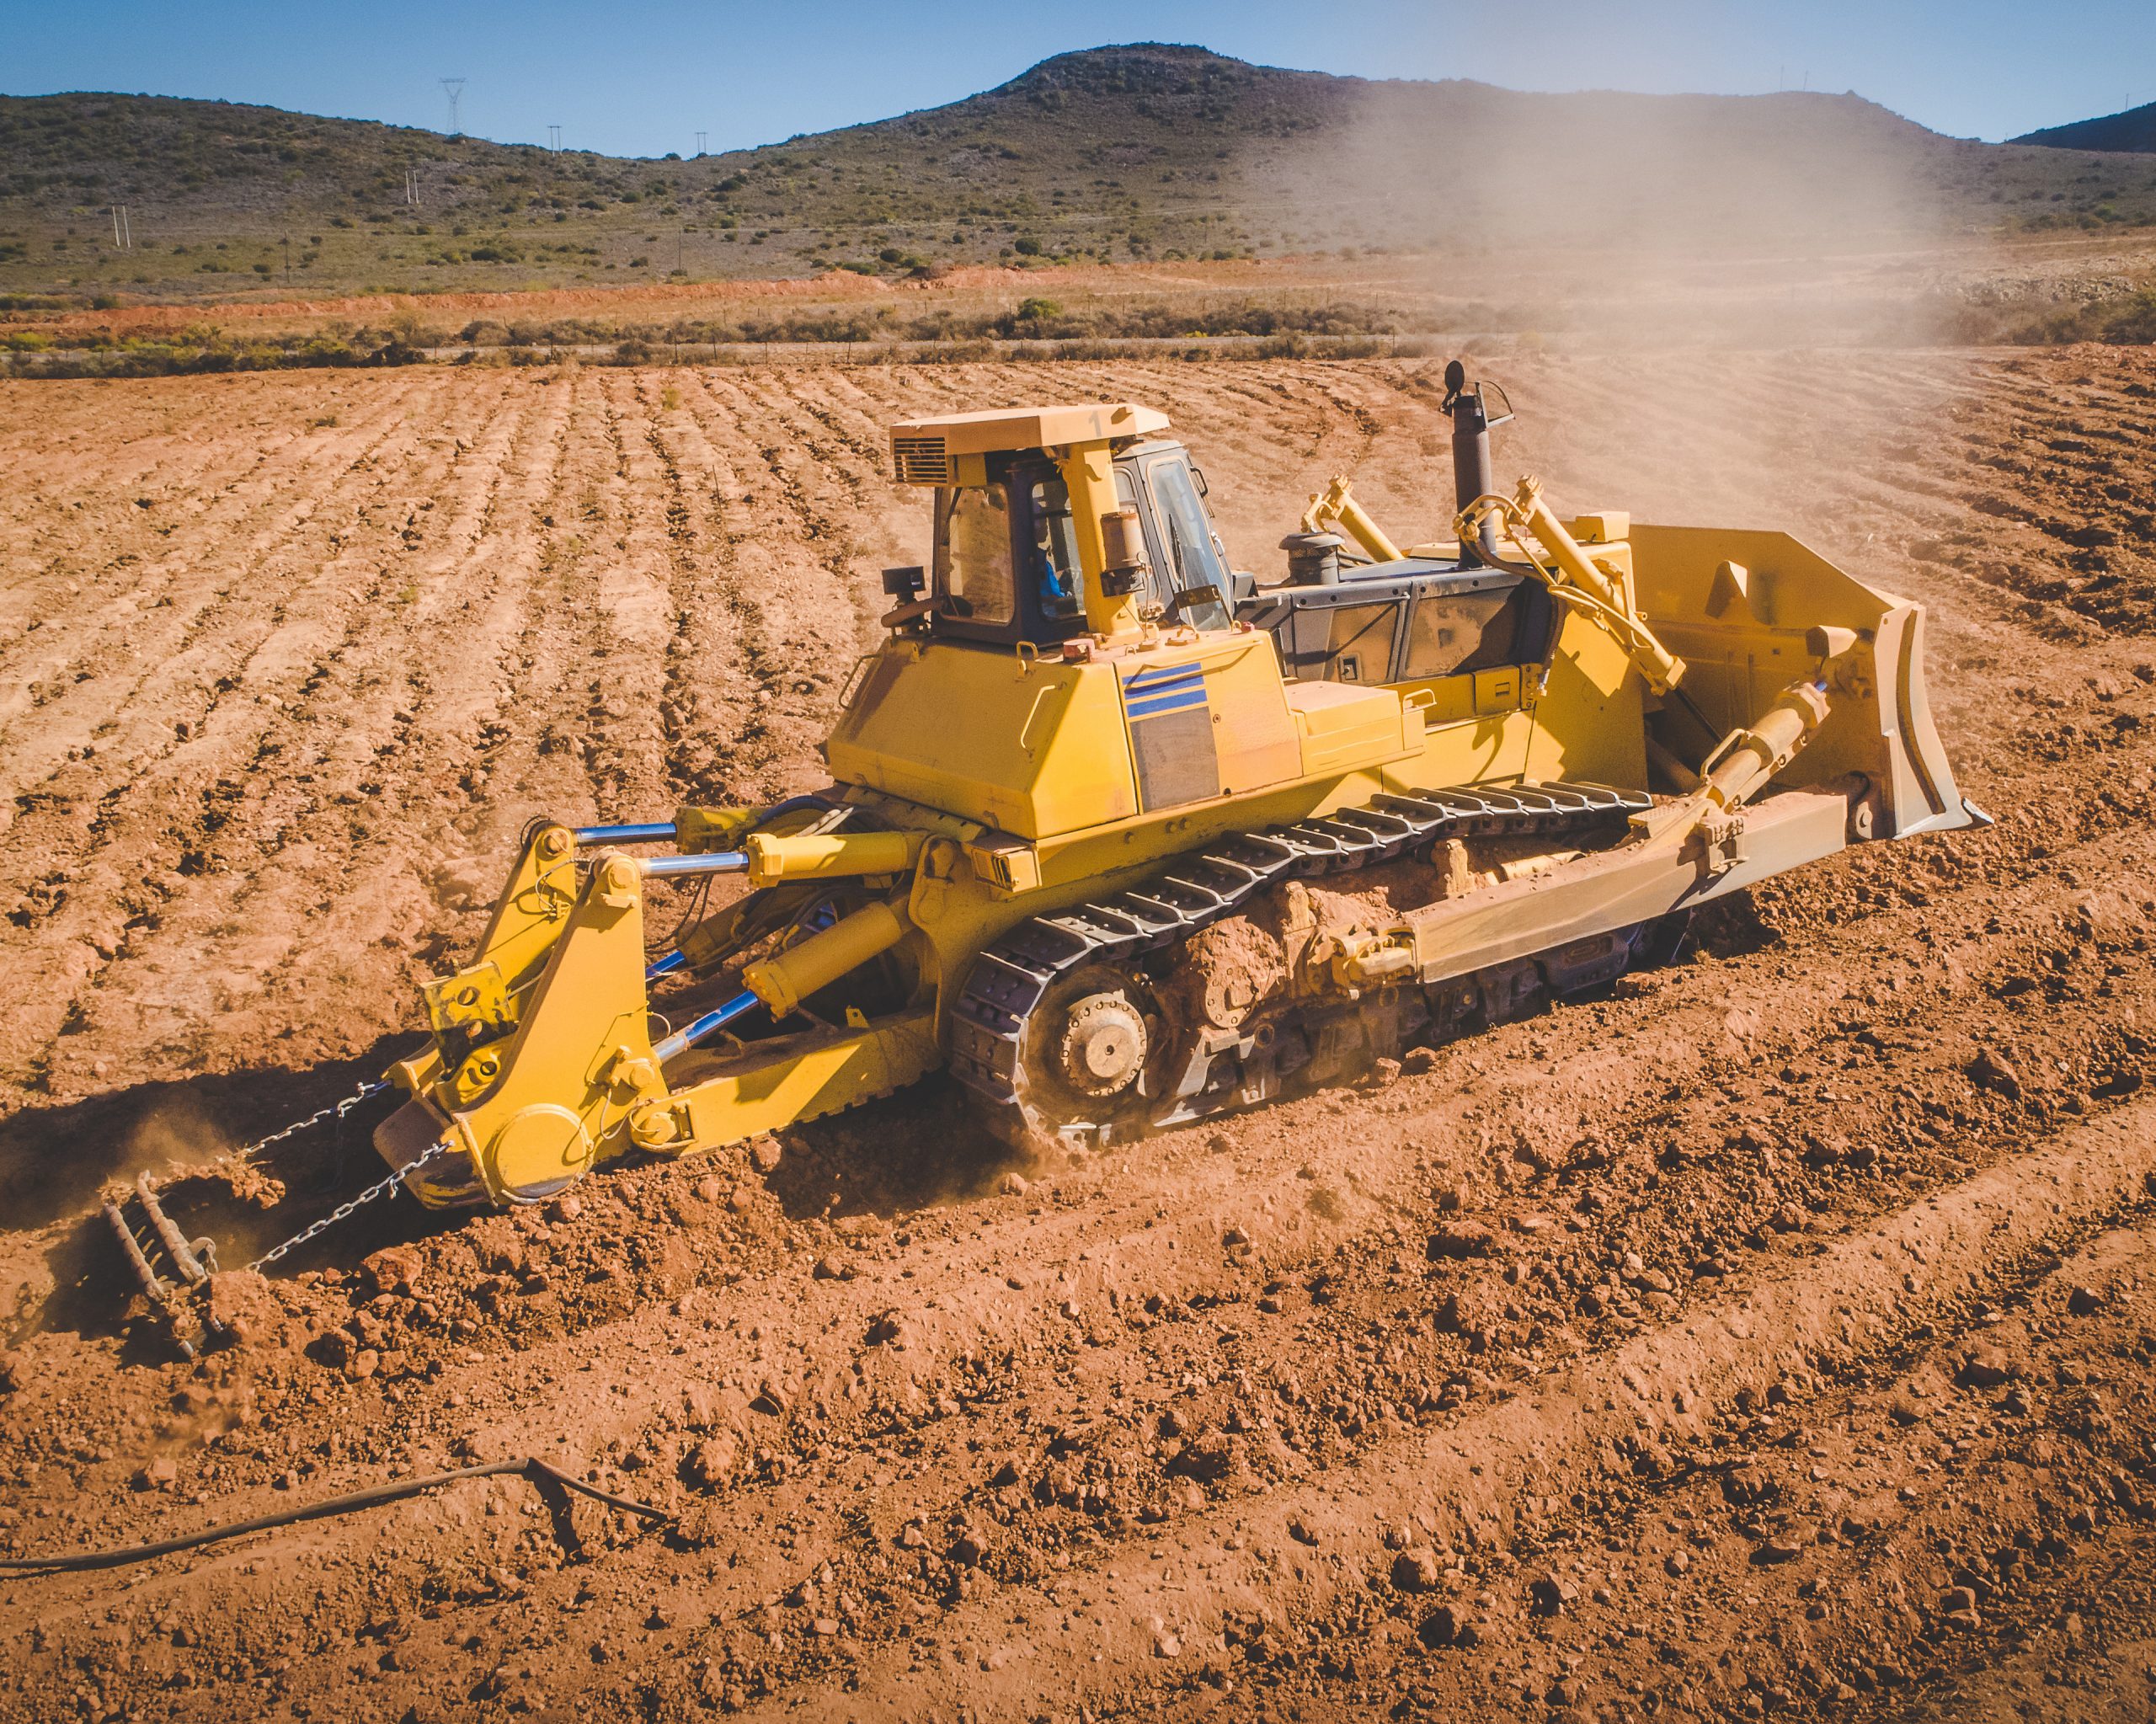 Aerial image of a bulldozer pushing and ripping ground on an agr